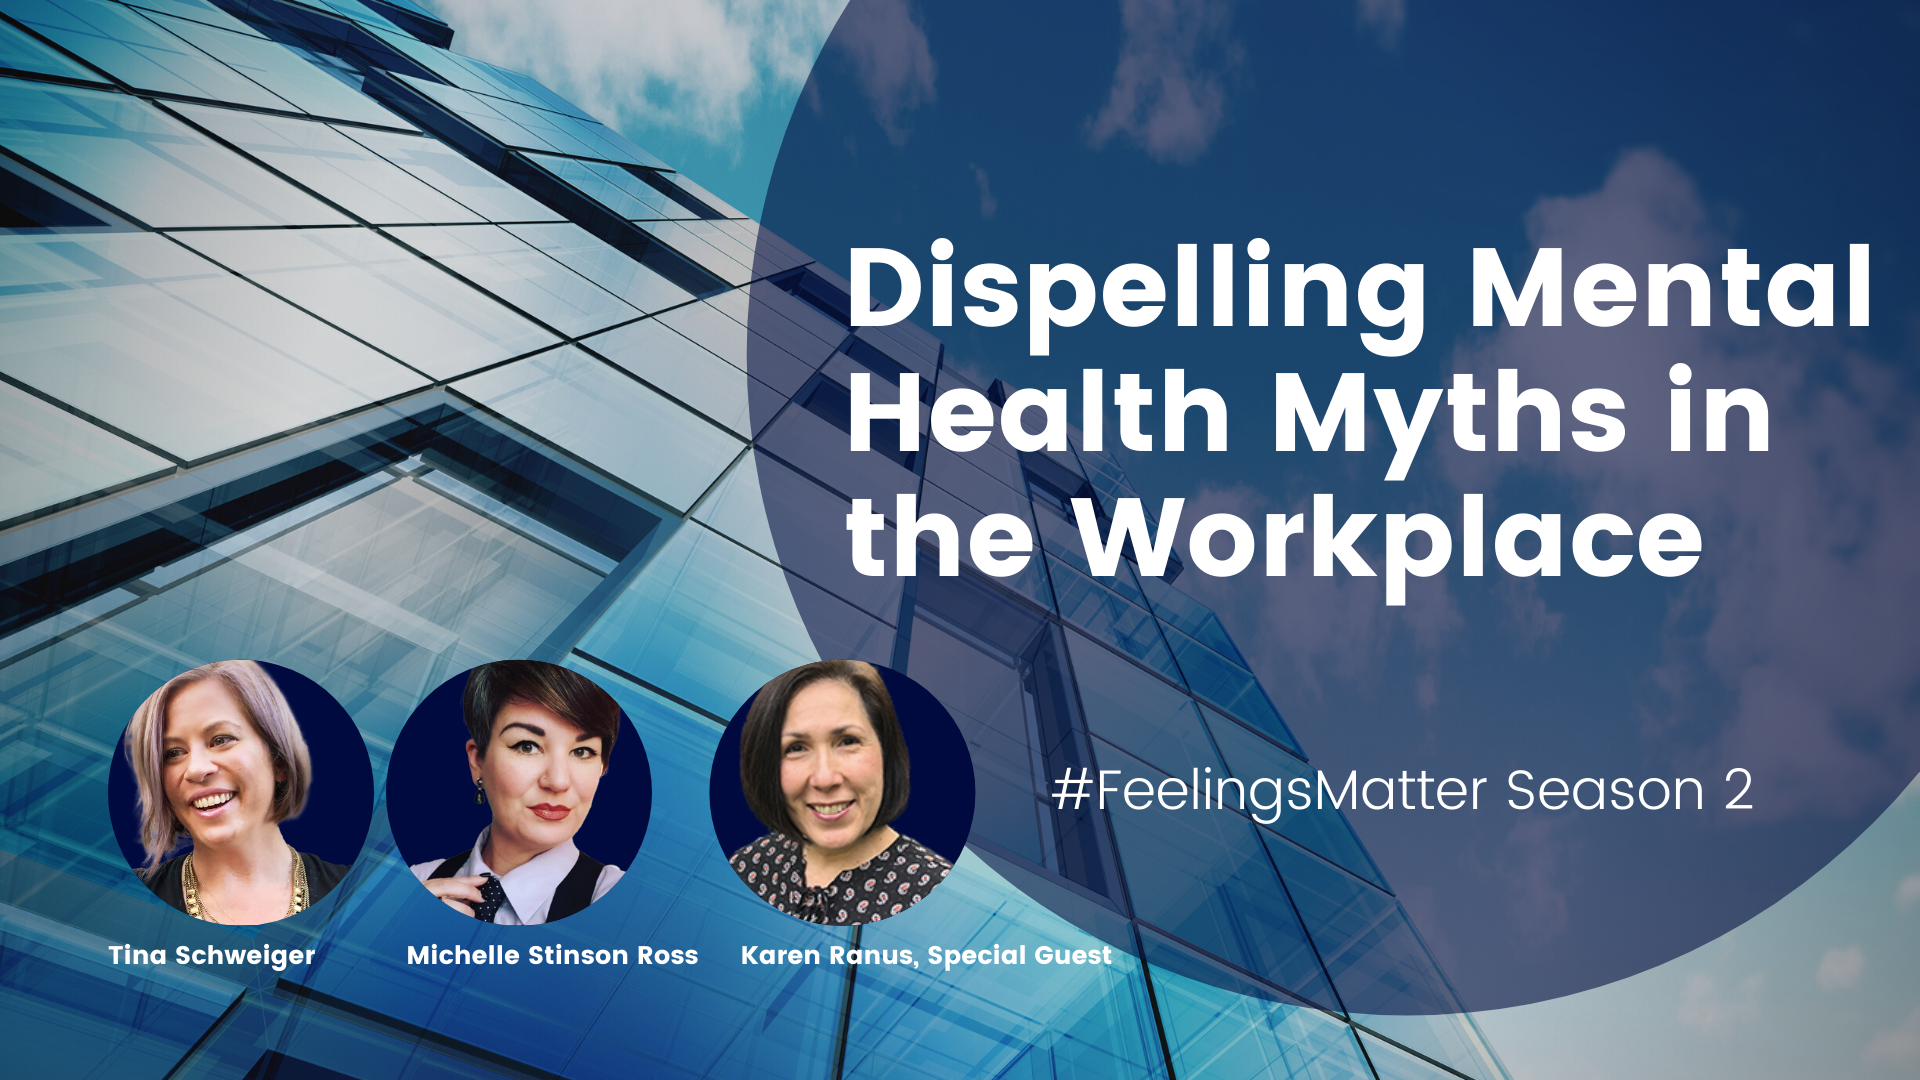 Dispelling Mental Health Myths in the Workplace